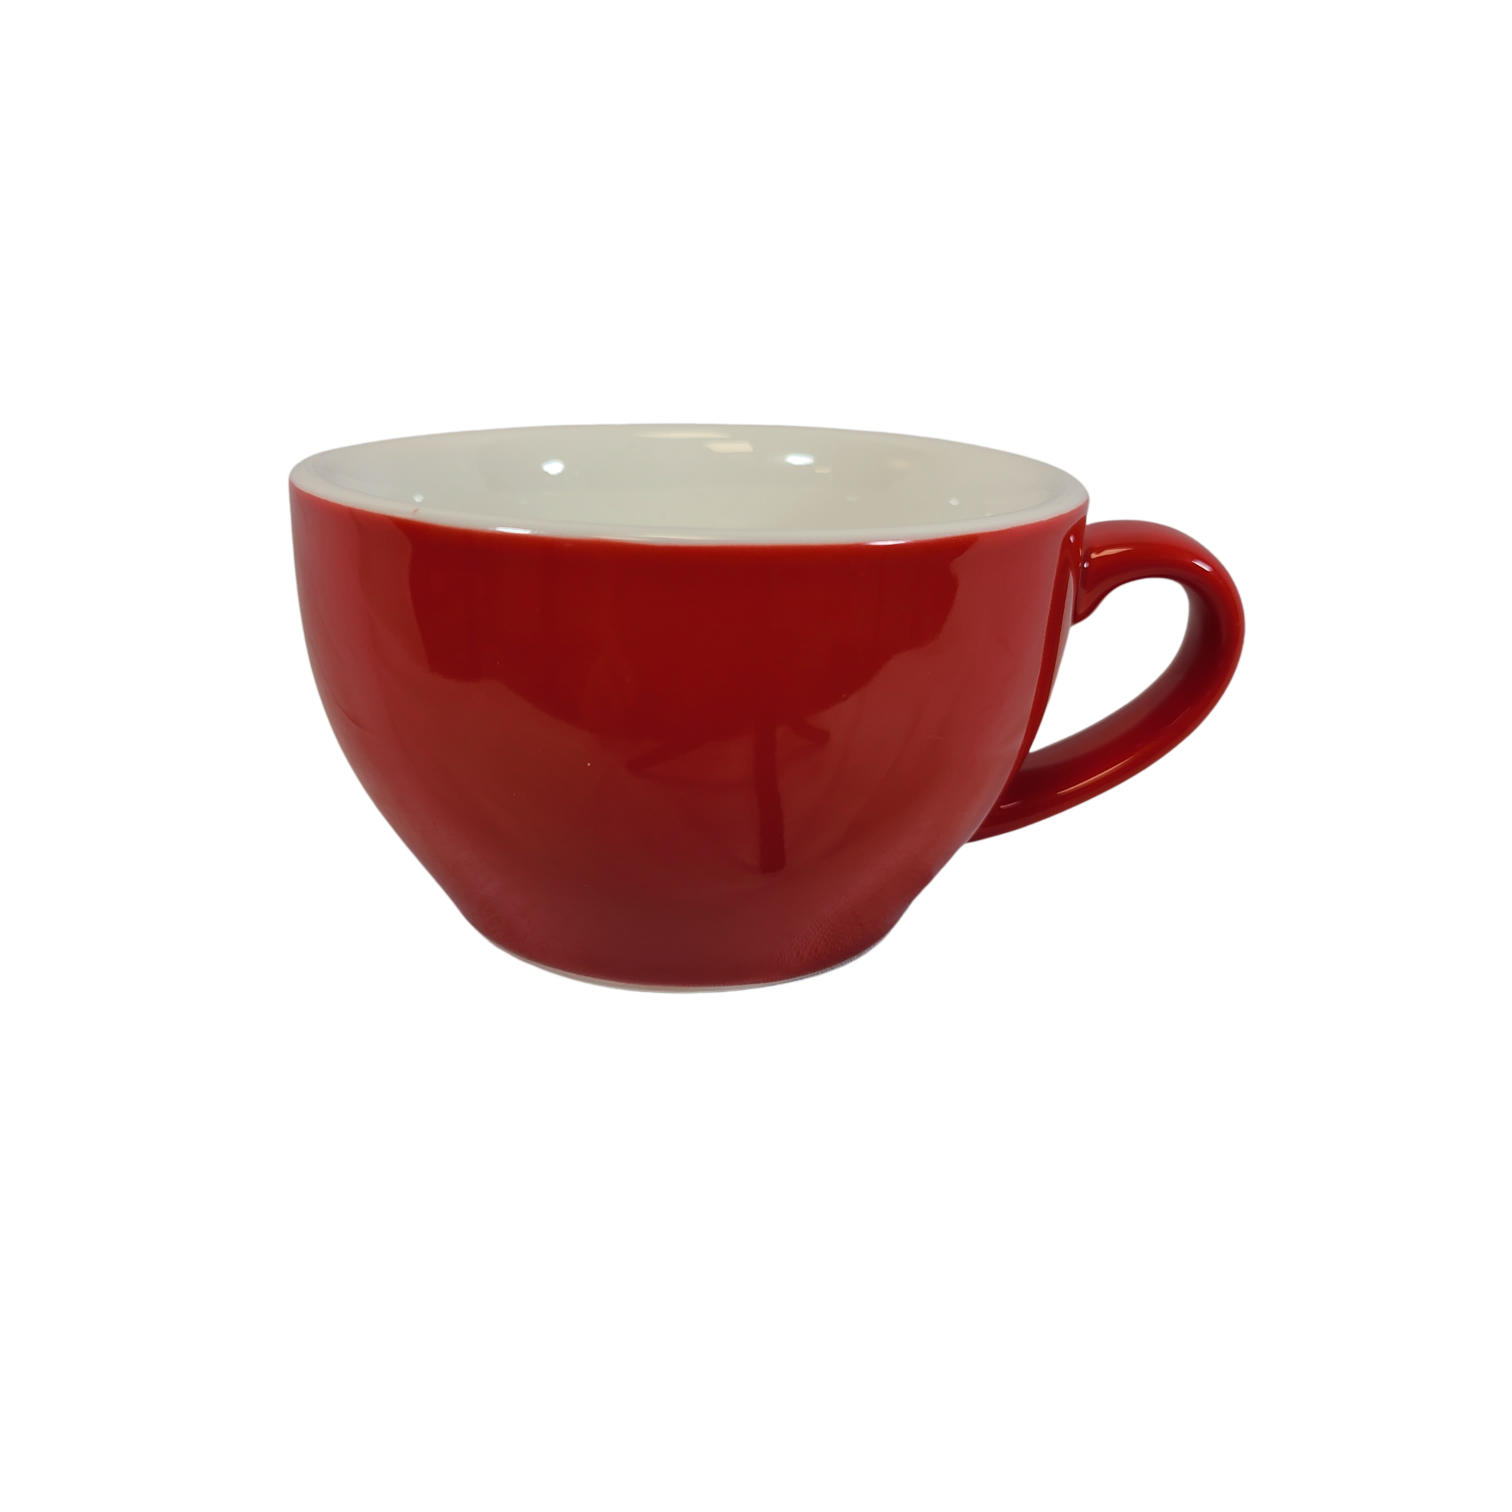 Coffee Addicts commercial ceramic cup in glossy red latte cappuccino cup 8oz 250ml